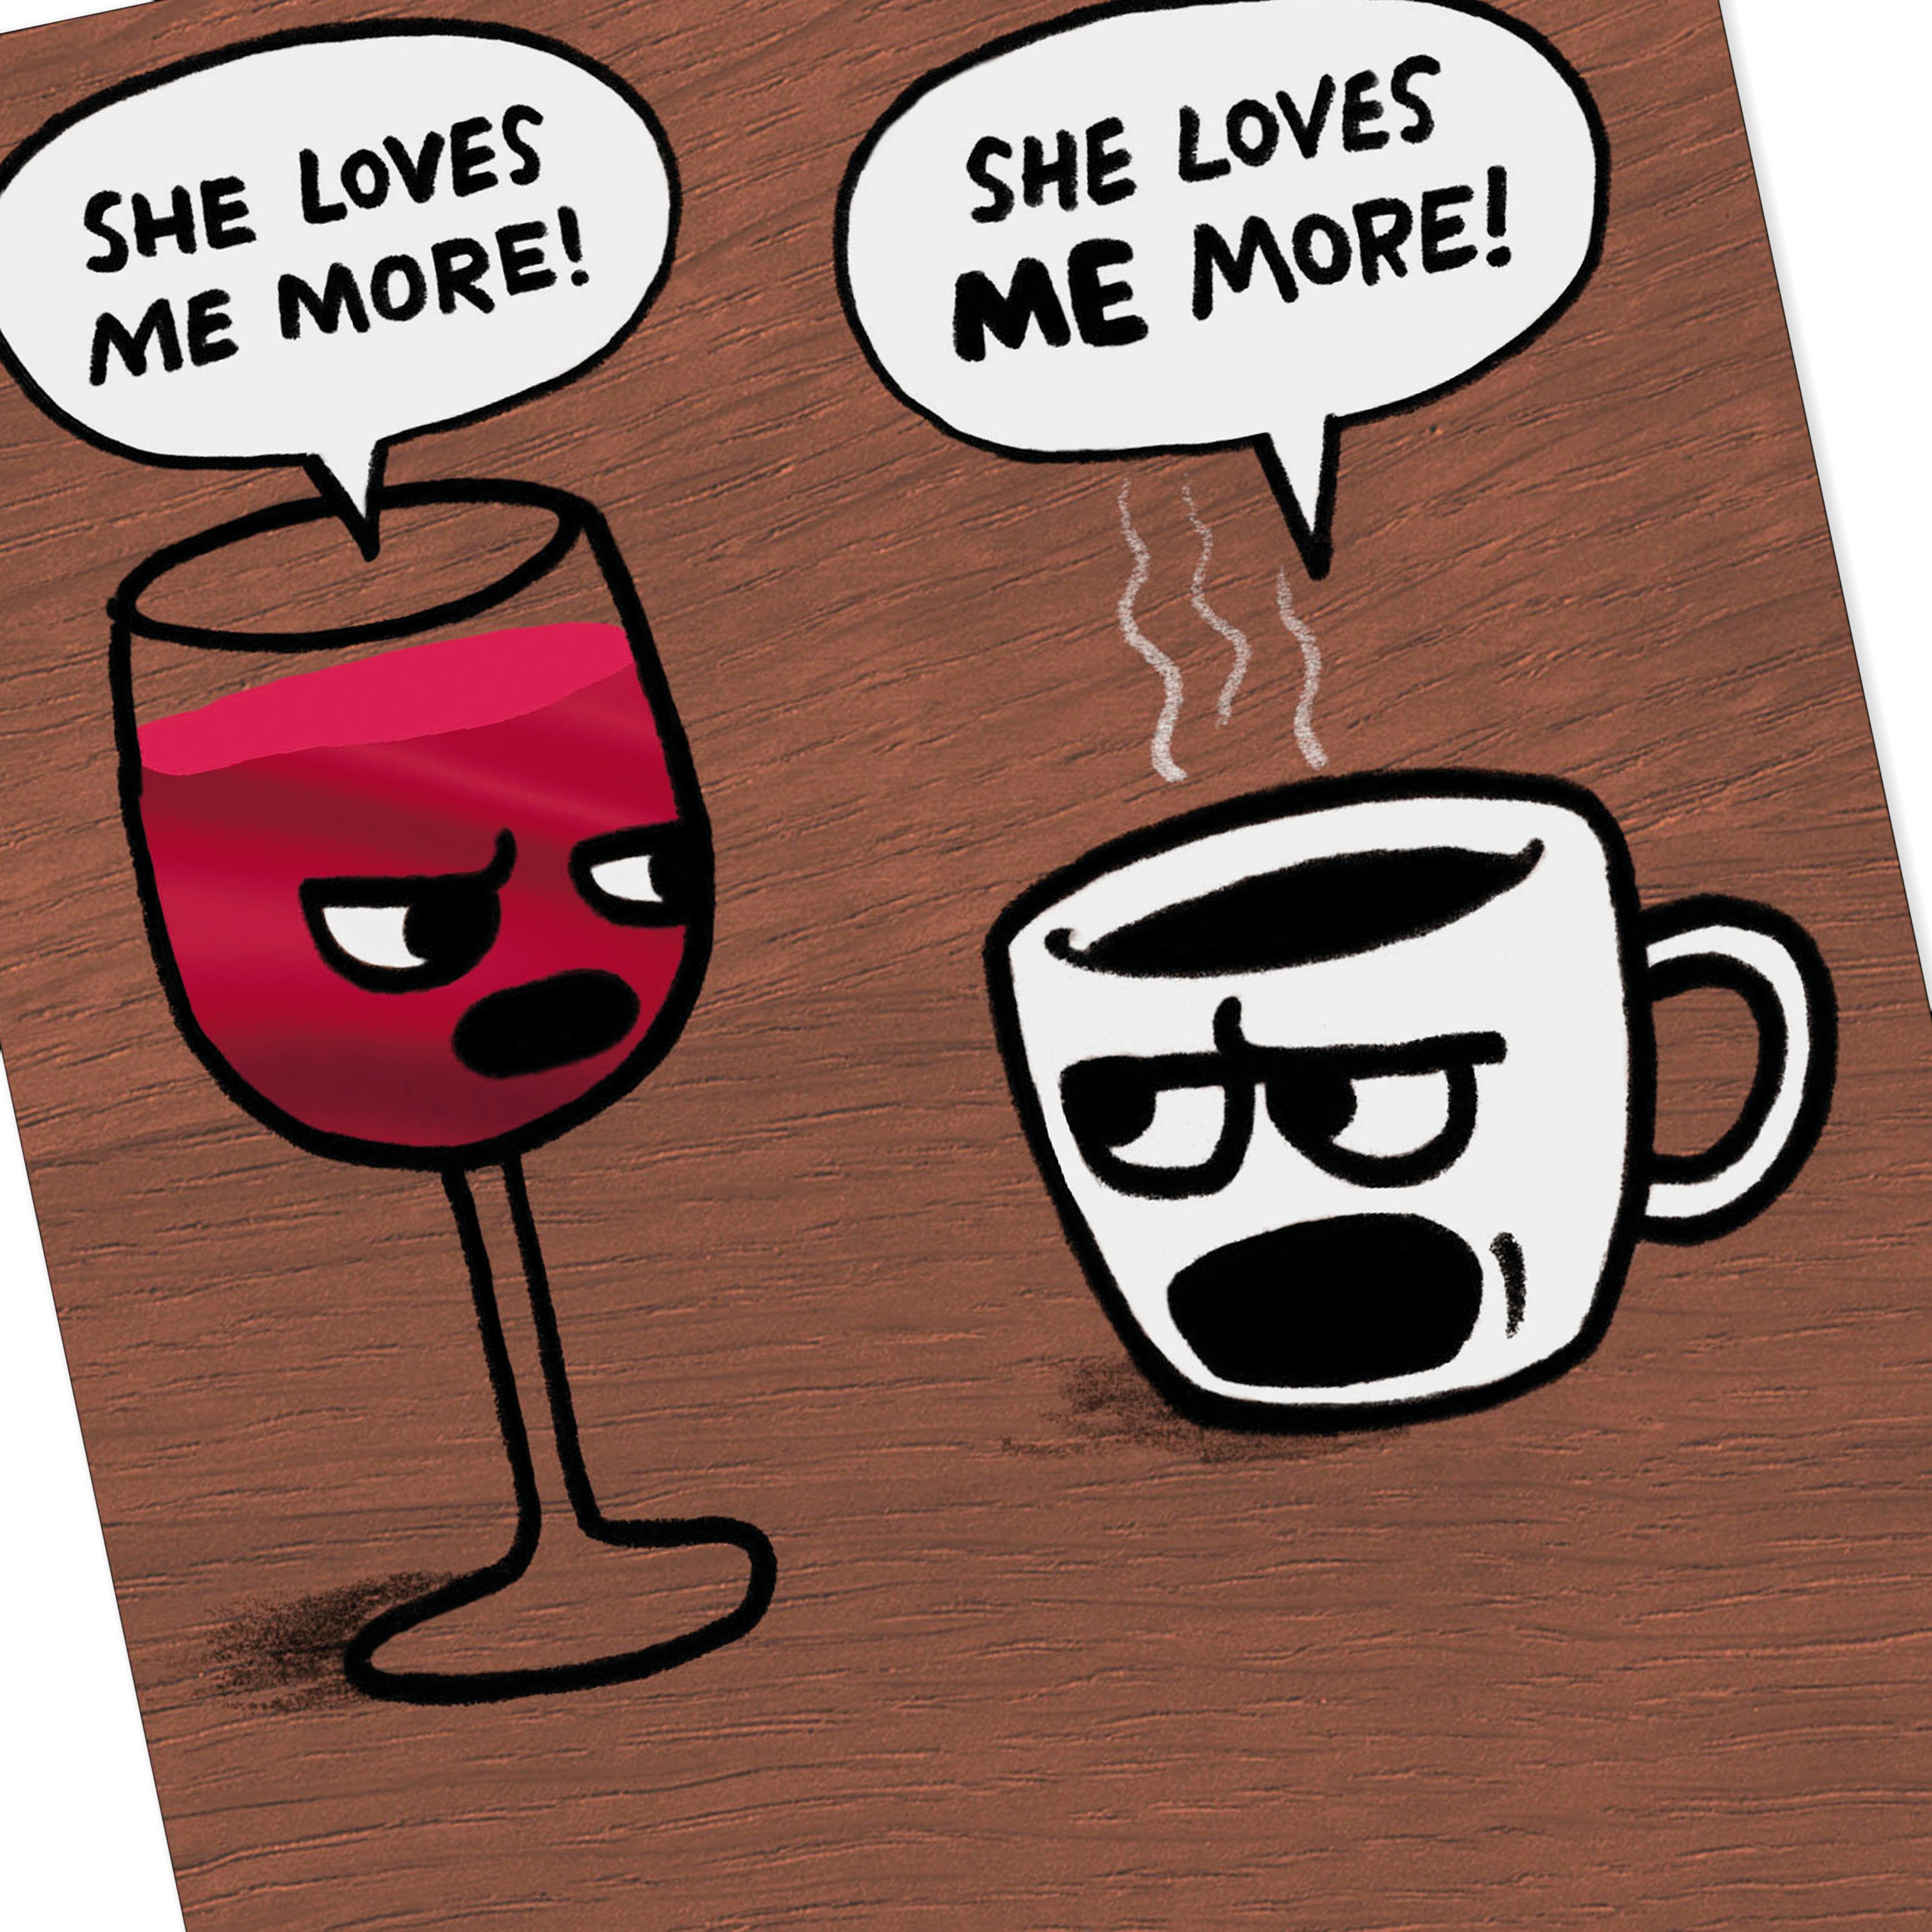 Shoebox Funny Birthday Card for Her (Wine and Coffee)